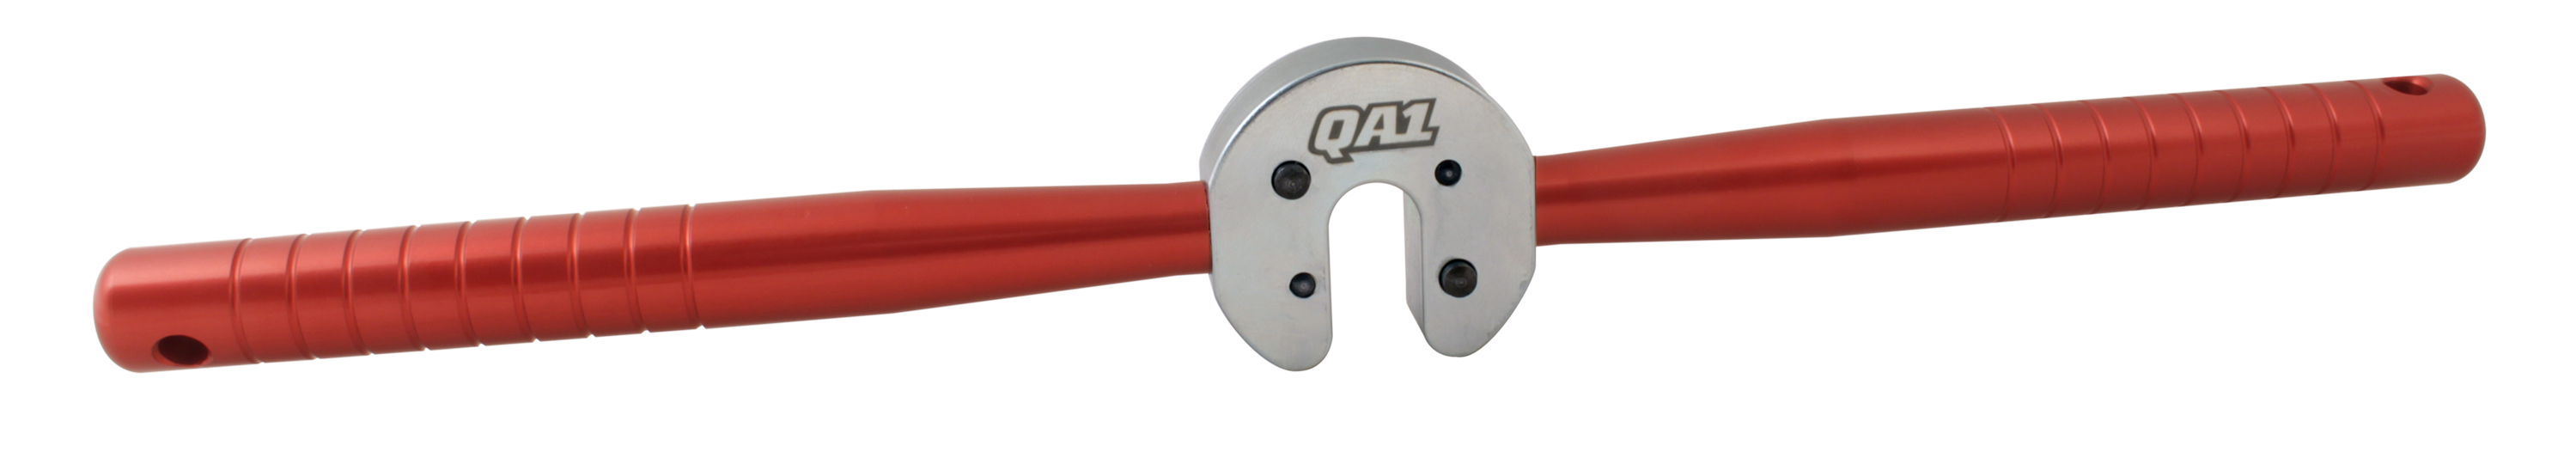 two-handled closure nut wrench